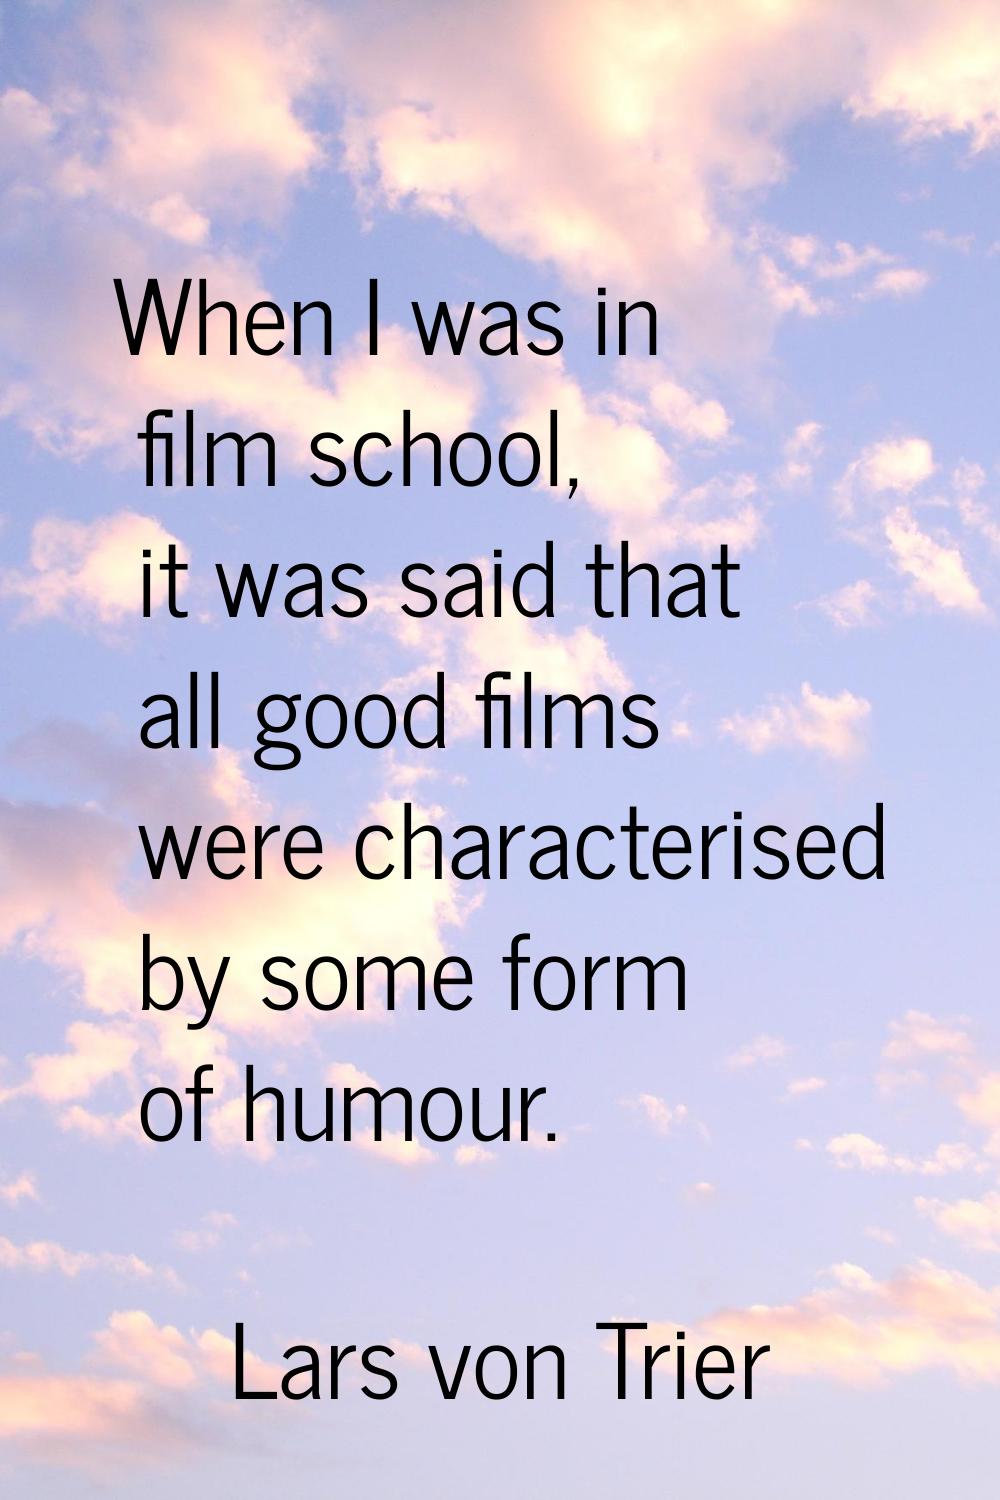 When I was in film school, it was said that all good films were characterised by some form of humou